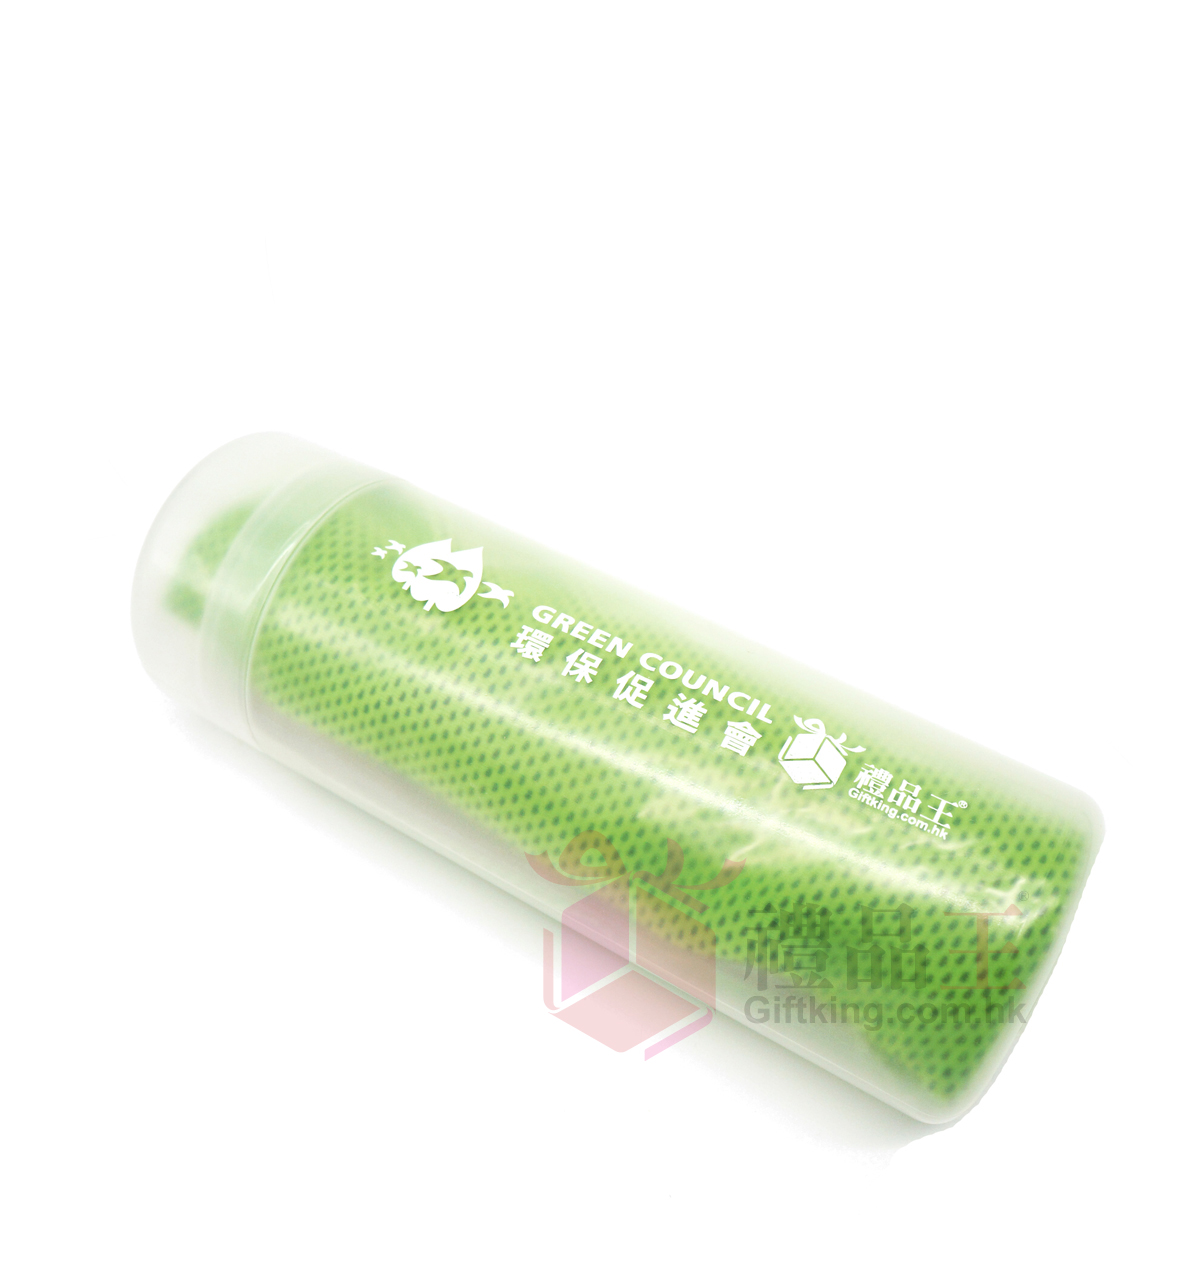 Green Council ice towel (Sports gift)